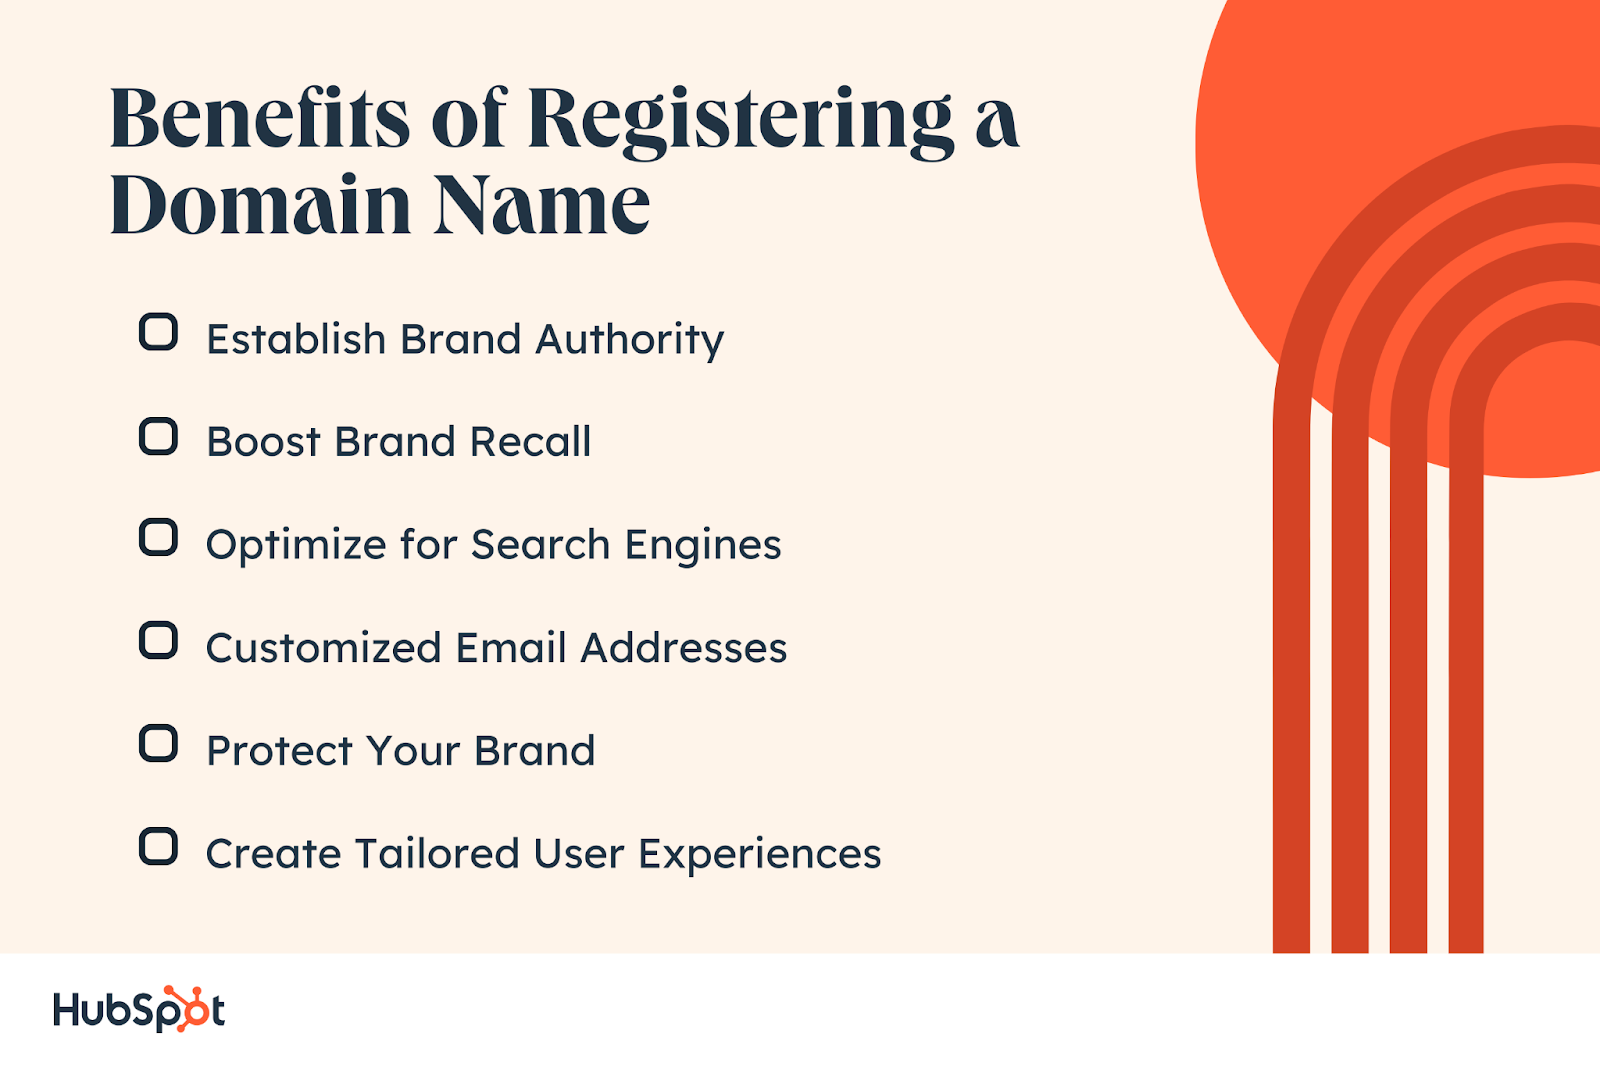 Benefits of Registering a Domain Name. Establish Brand Authority. Boost Brand Recall.. Optimize for Search Engines. Customized Email Addresses. Protect Your Brand. Create Tailored User Experiences